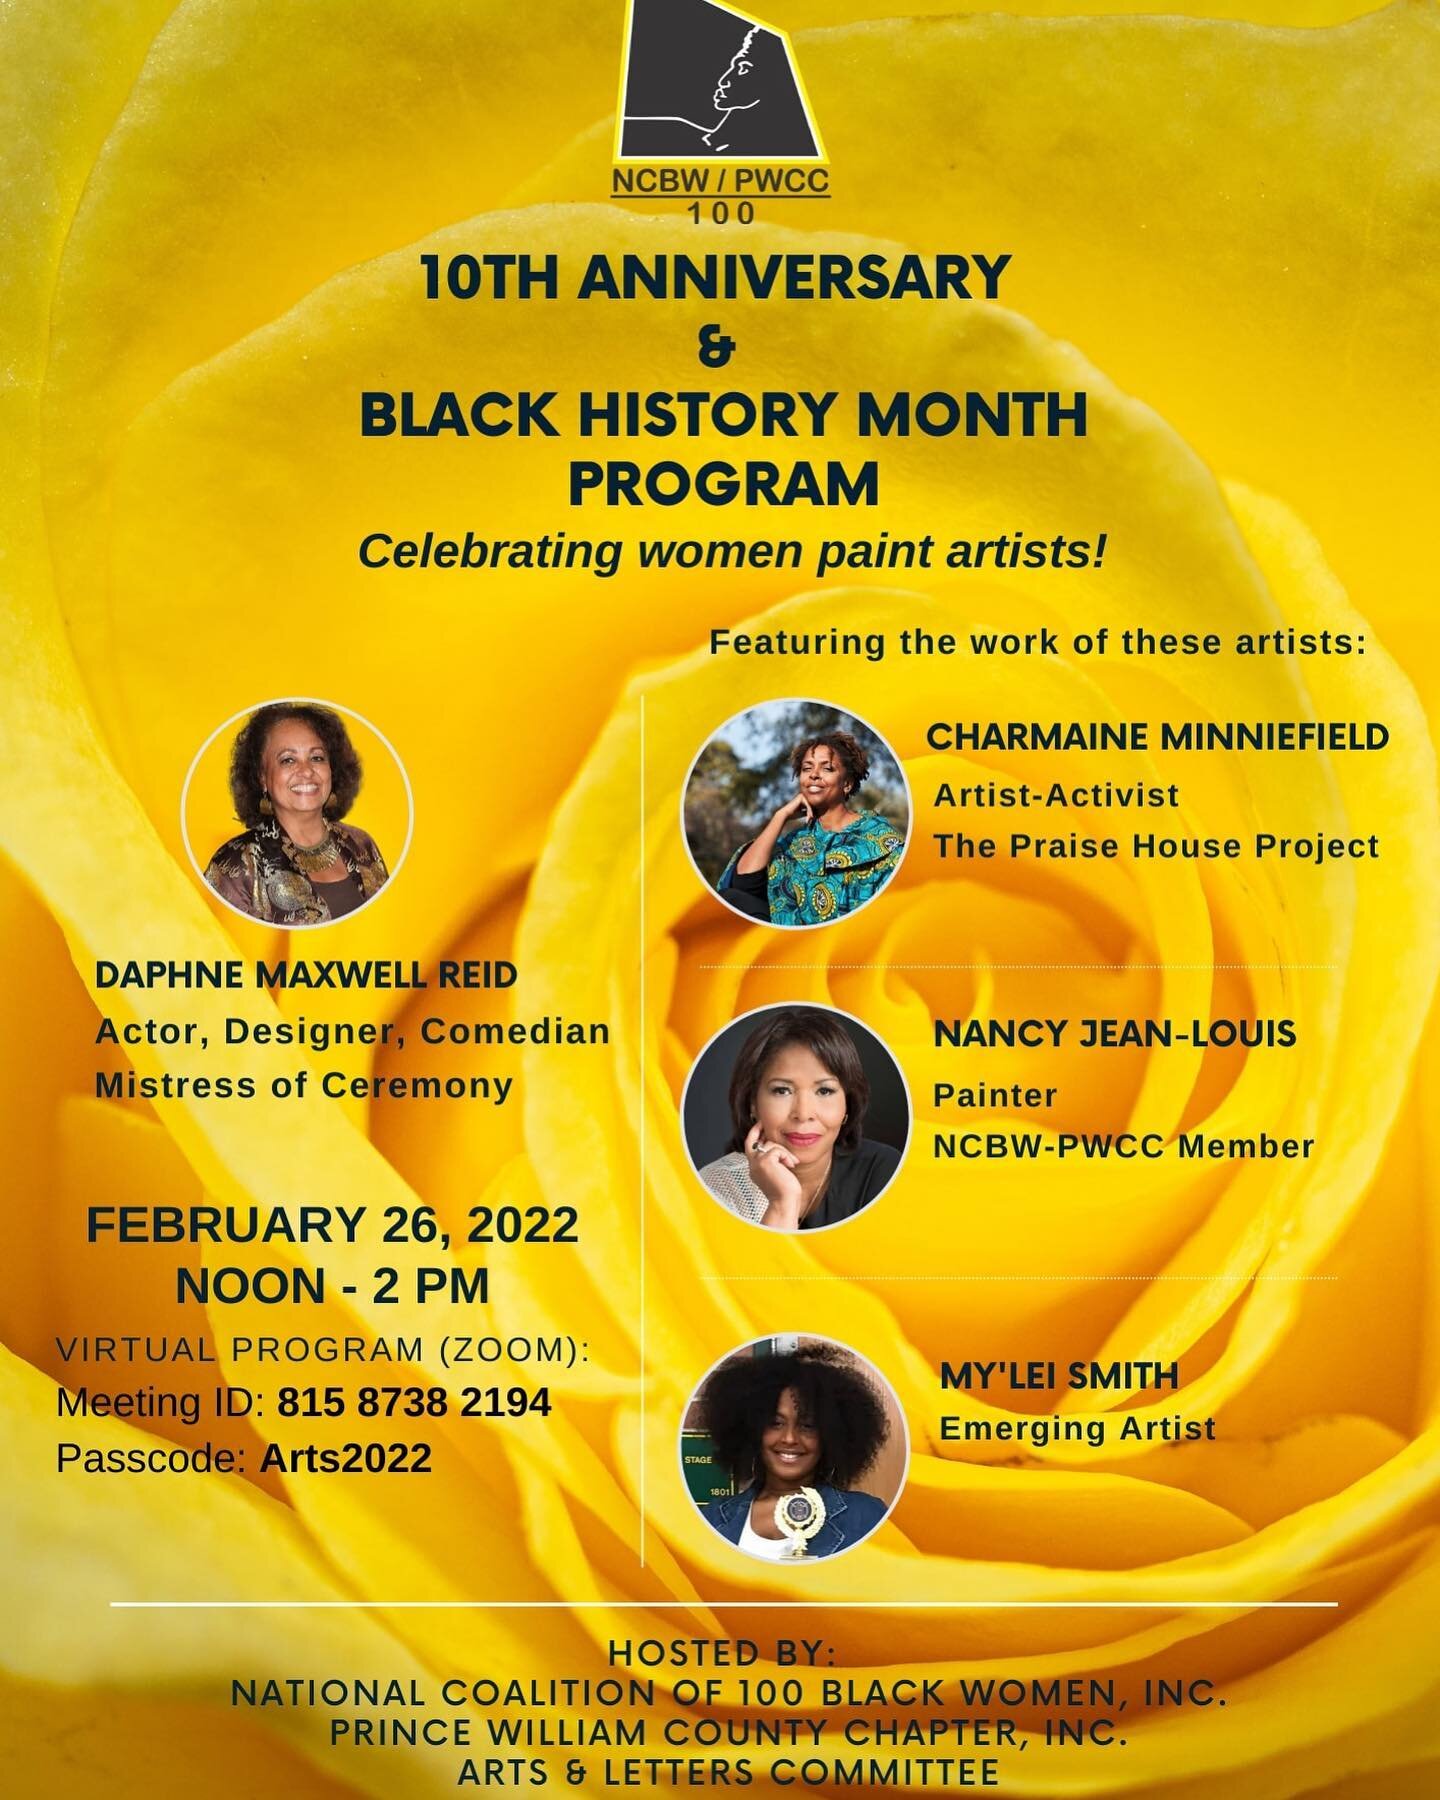 You are cordially invited to attend the 10th Anniversary and Black History Month Program for the National Coalition of 100 Black Women, Prince William County Chapter, Inc. this Saturday, February 26th from 12-2pm. 

You won&rsquo;t want to miss it!
@